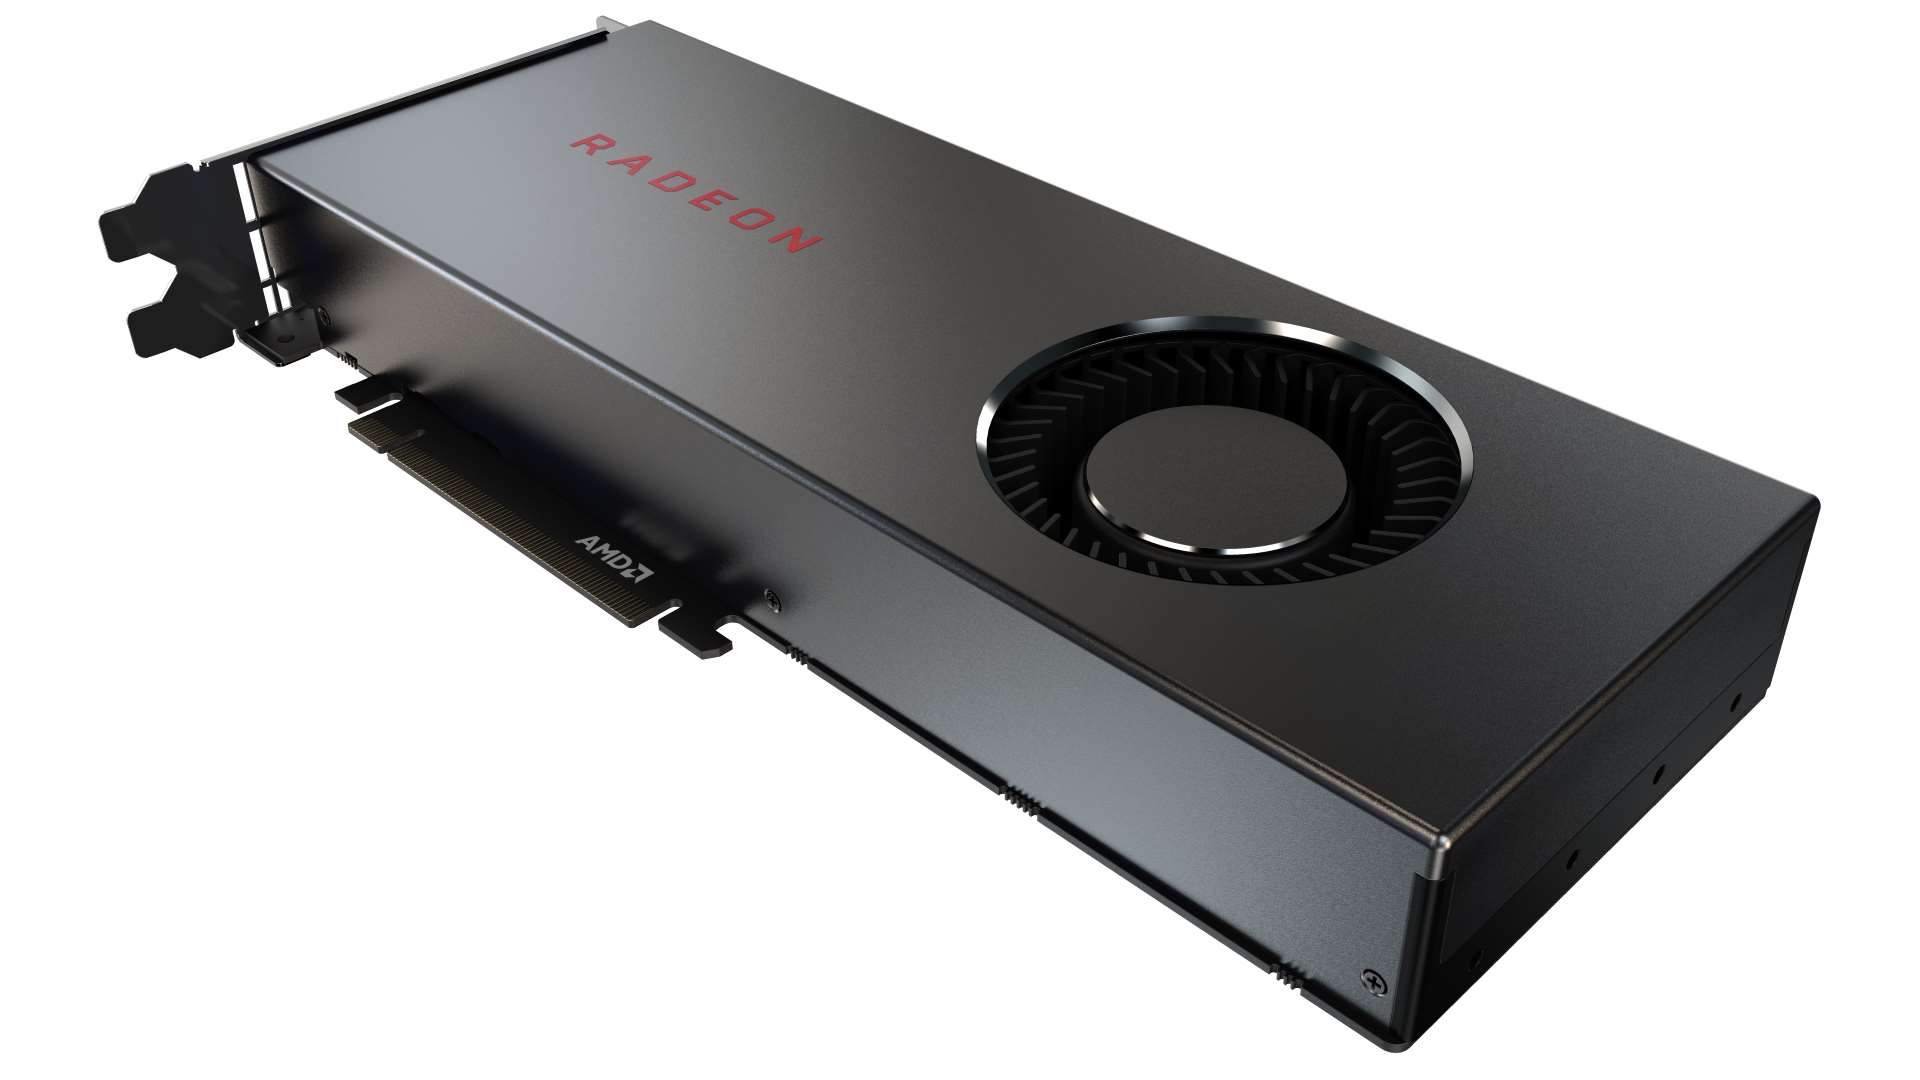 AMD Radeon RX 5700 XT release date, price, specs, and performance